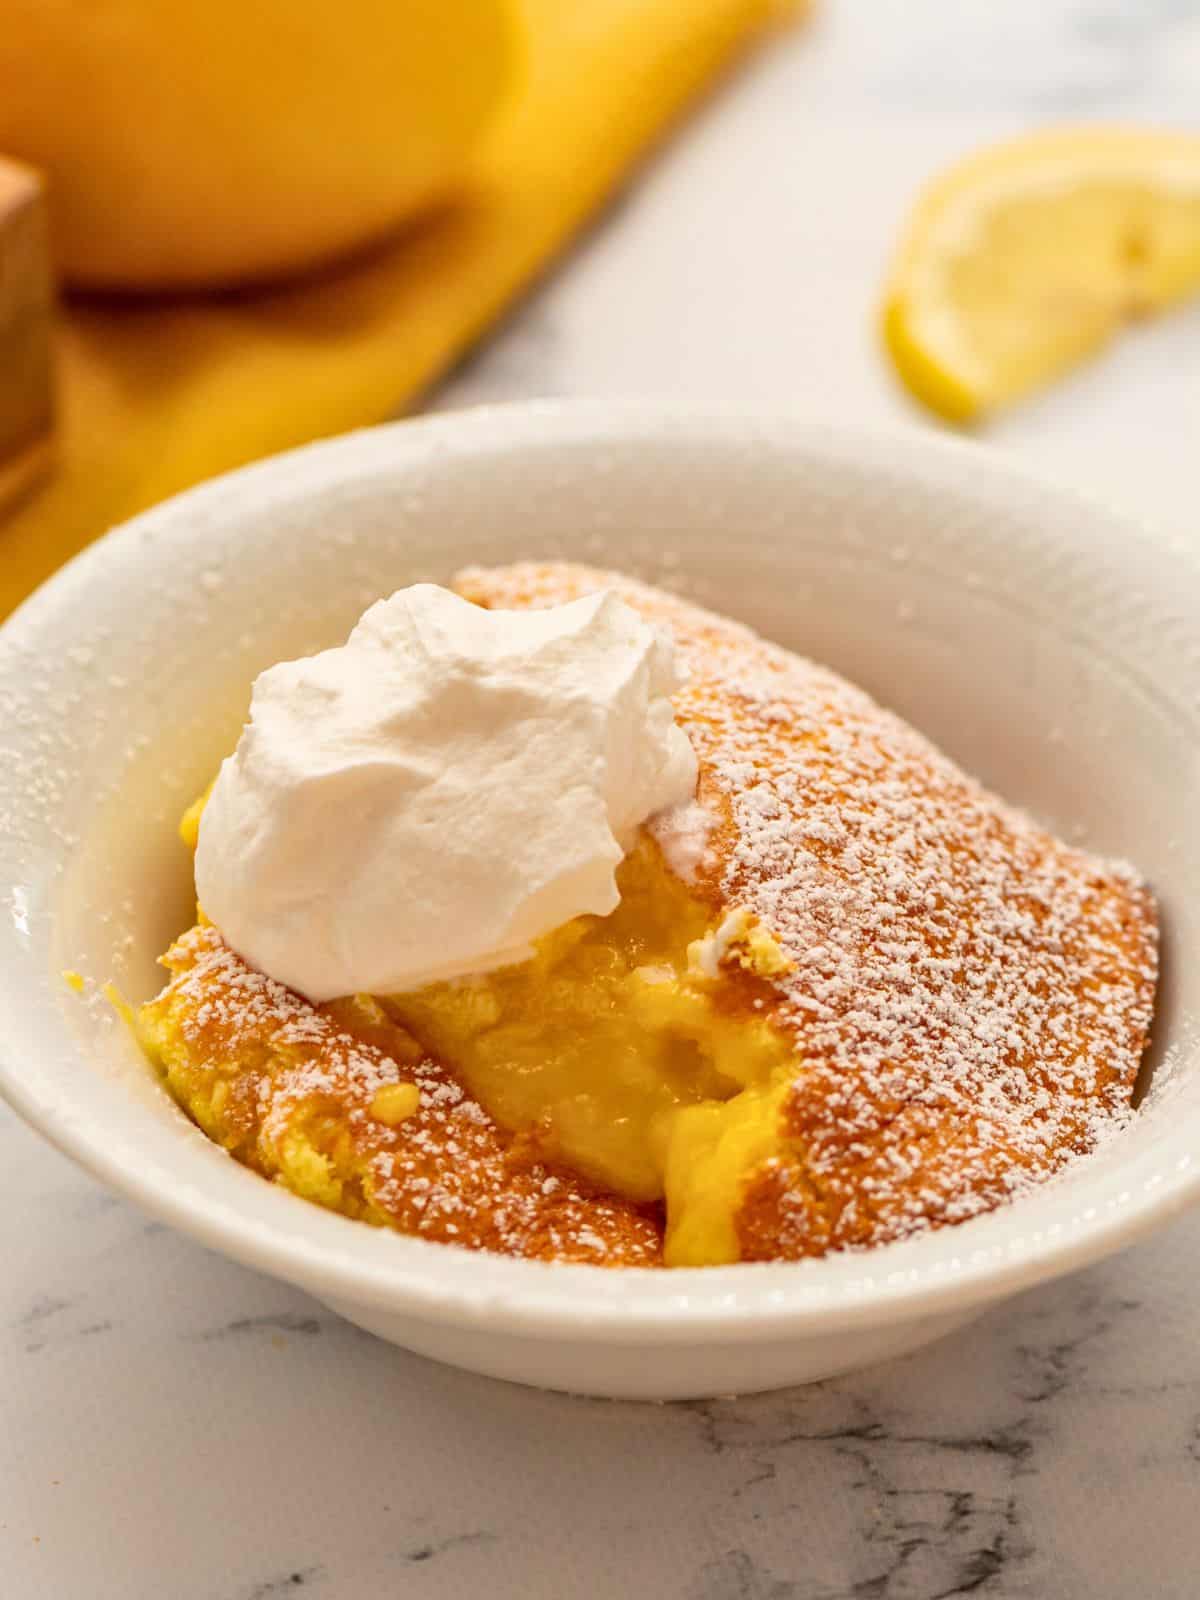 Baked Lemon Pudding Cake served in white dish topped with powdered sugar and whipped cream.